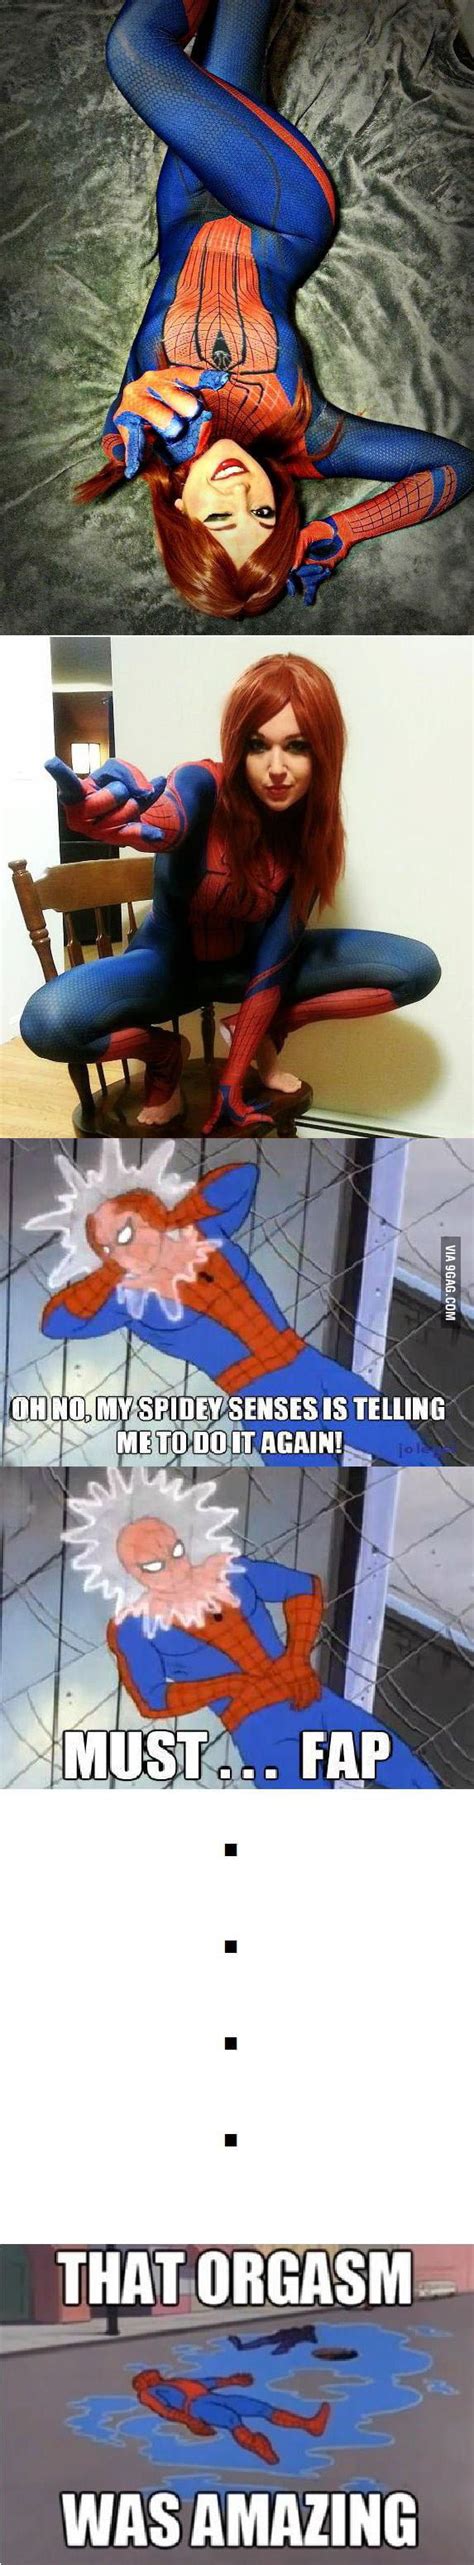 Just Spiderman Being Horny 9gag